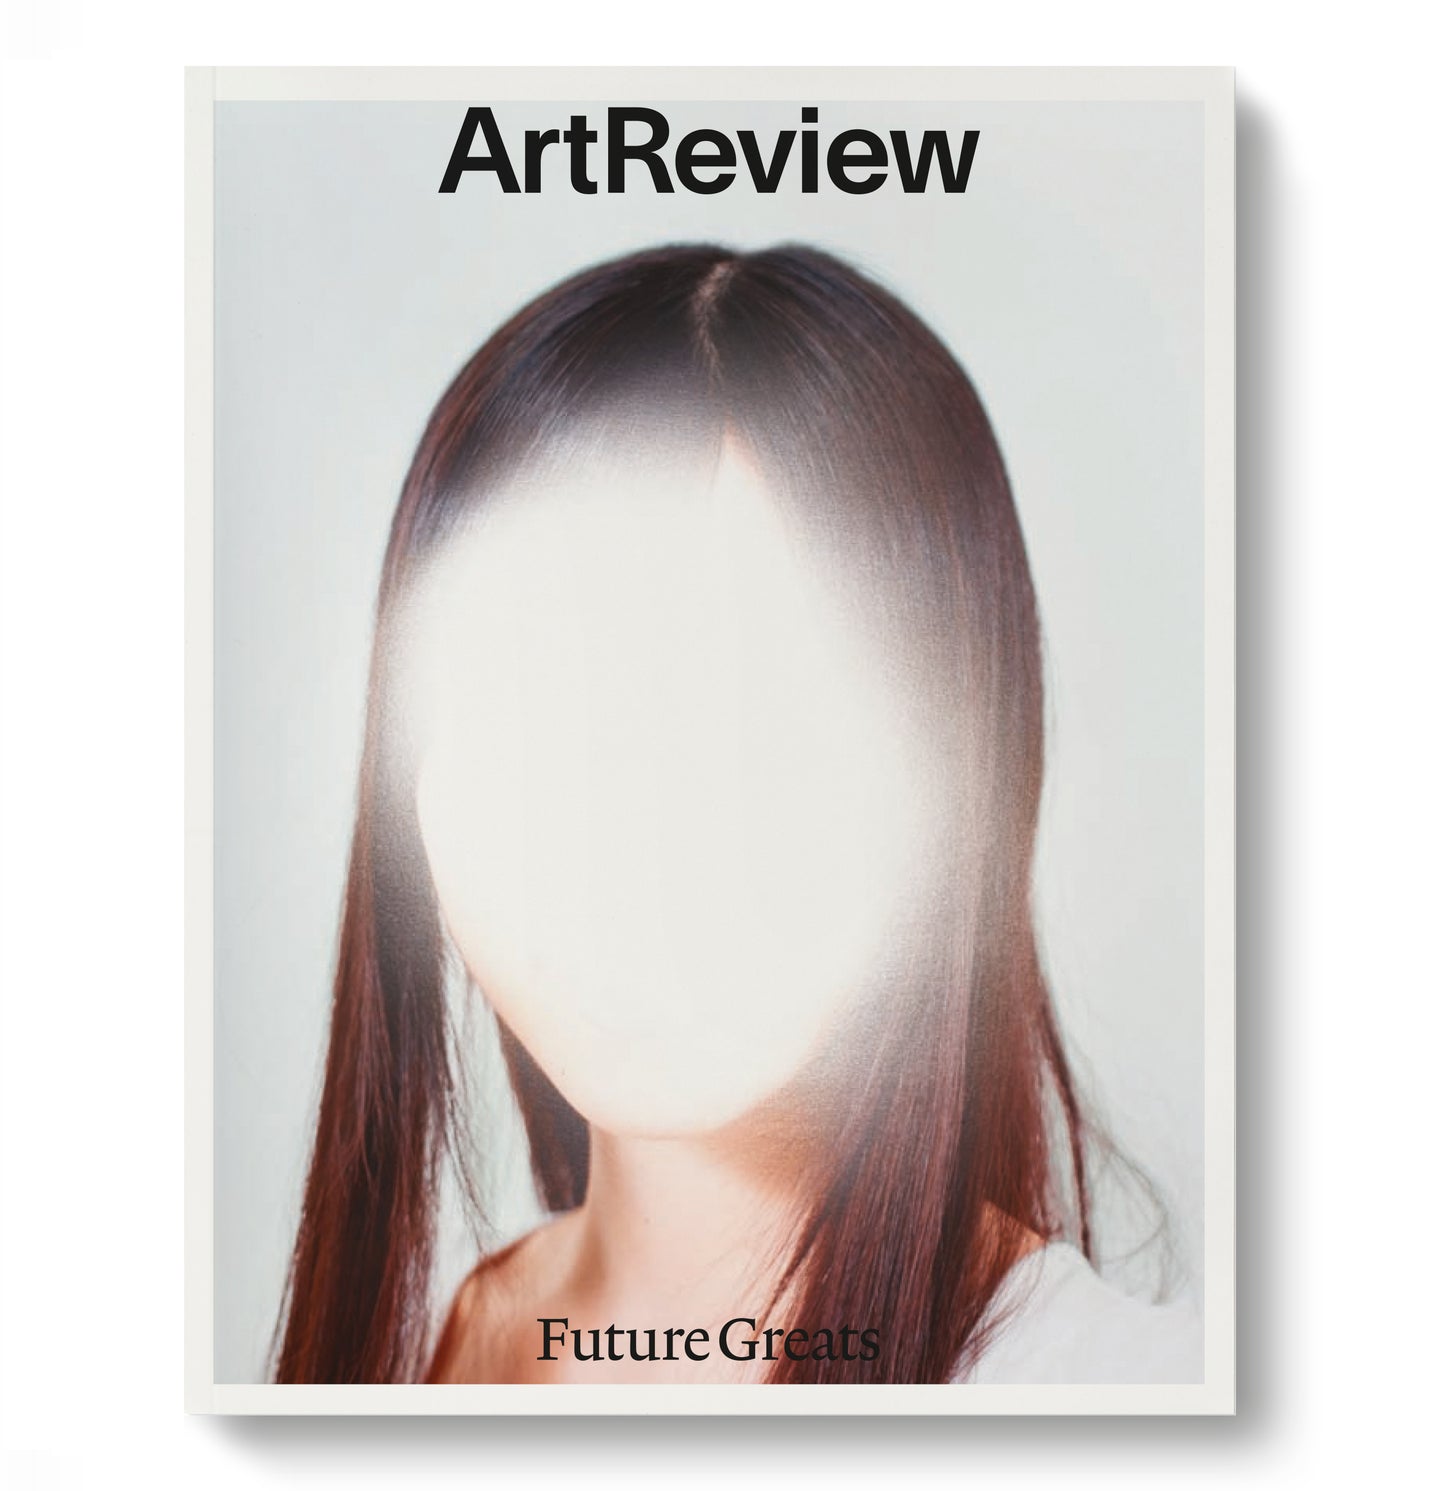 ArtReview March 2014 - Future Greats